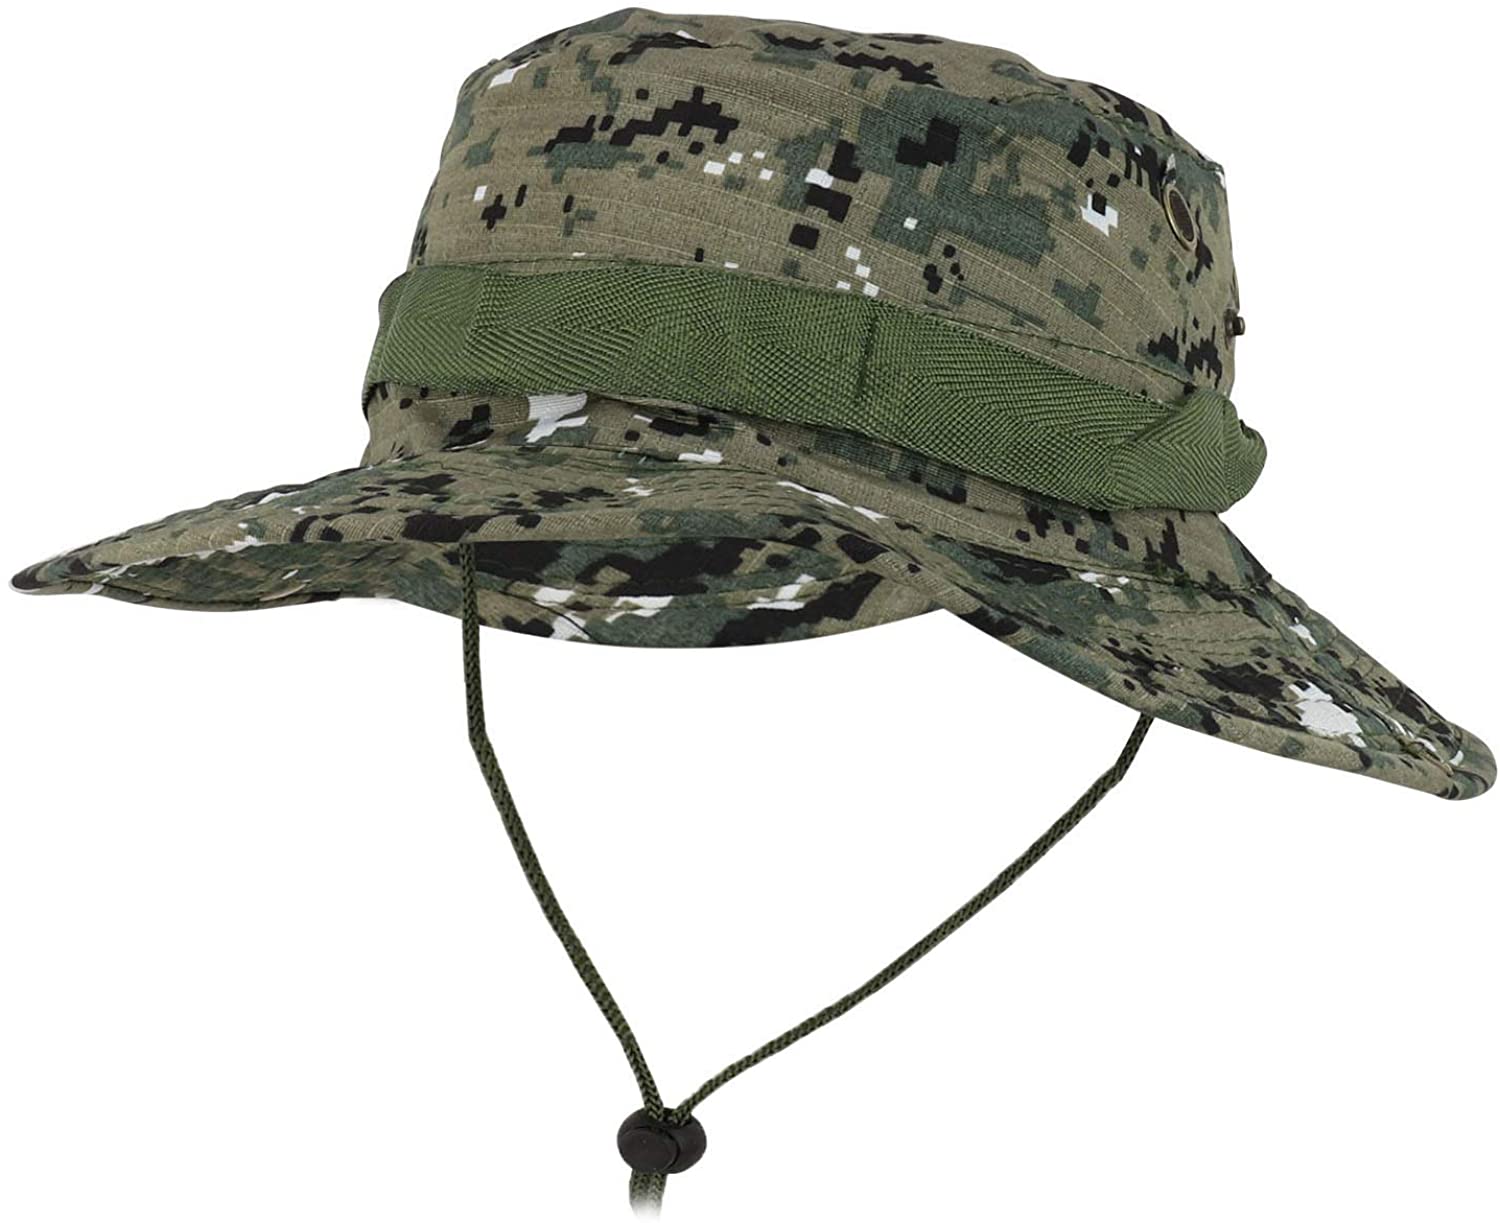 Armycrew Military Pixelated Camo Boonie Hat with Adjustable Chin Strap Green